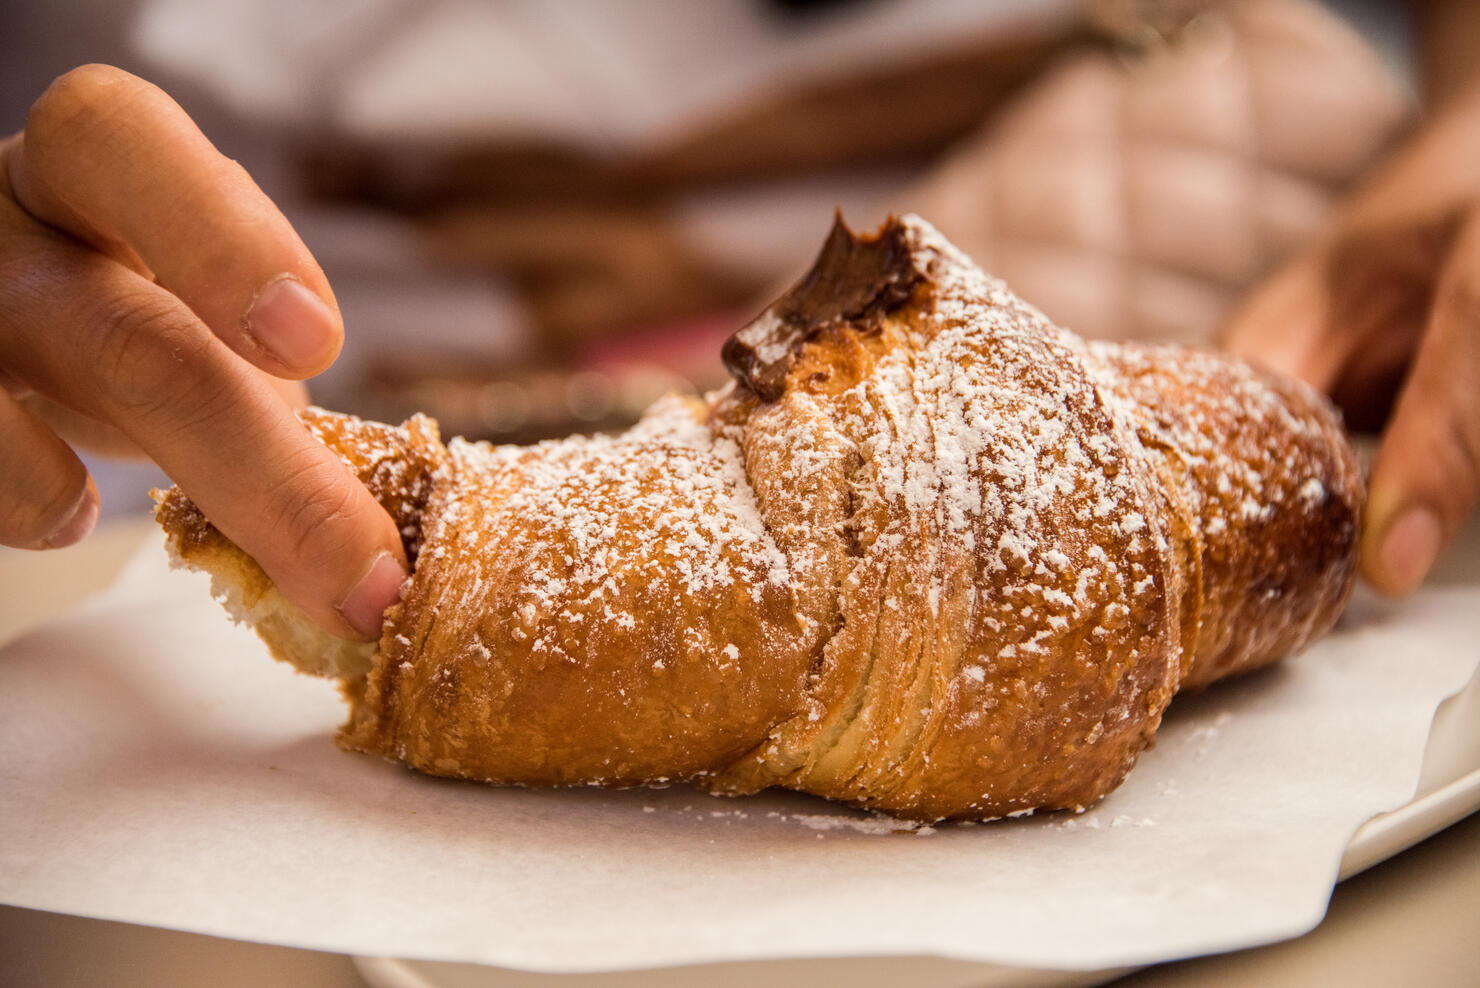 Eating a Sicilian chocolate croissant